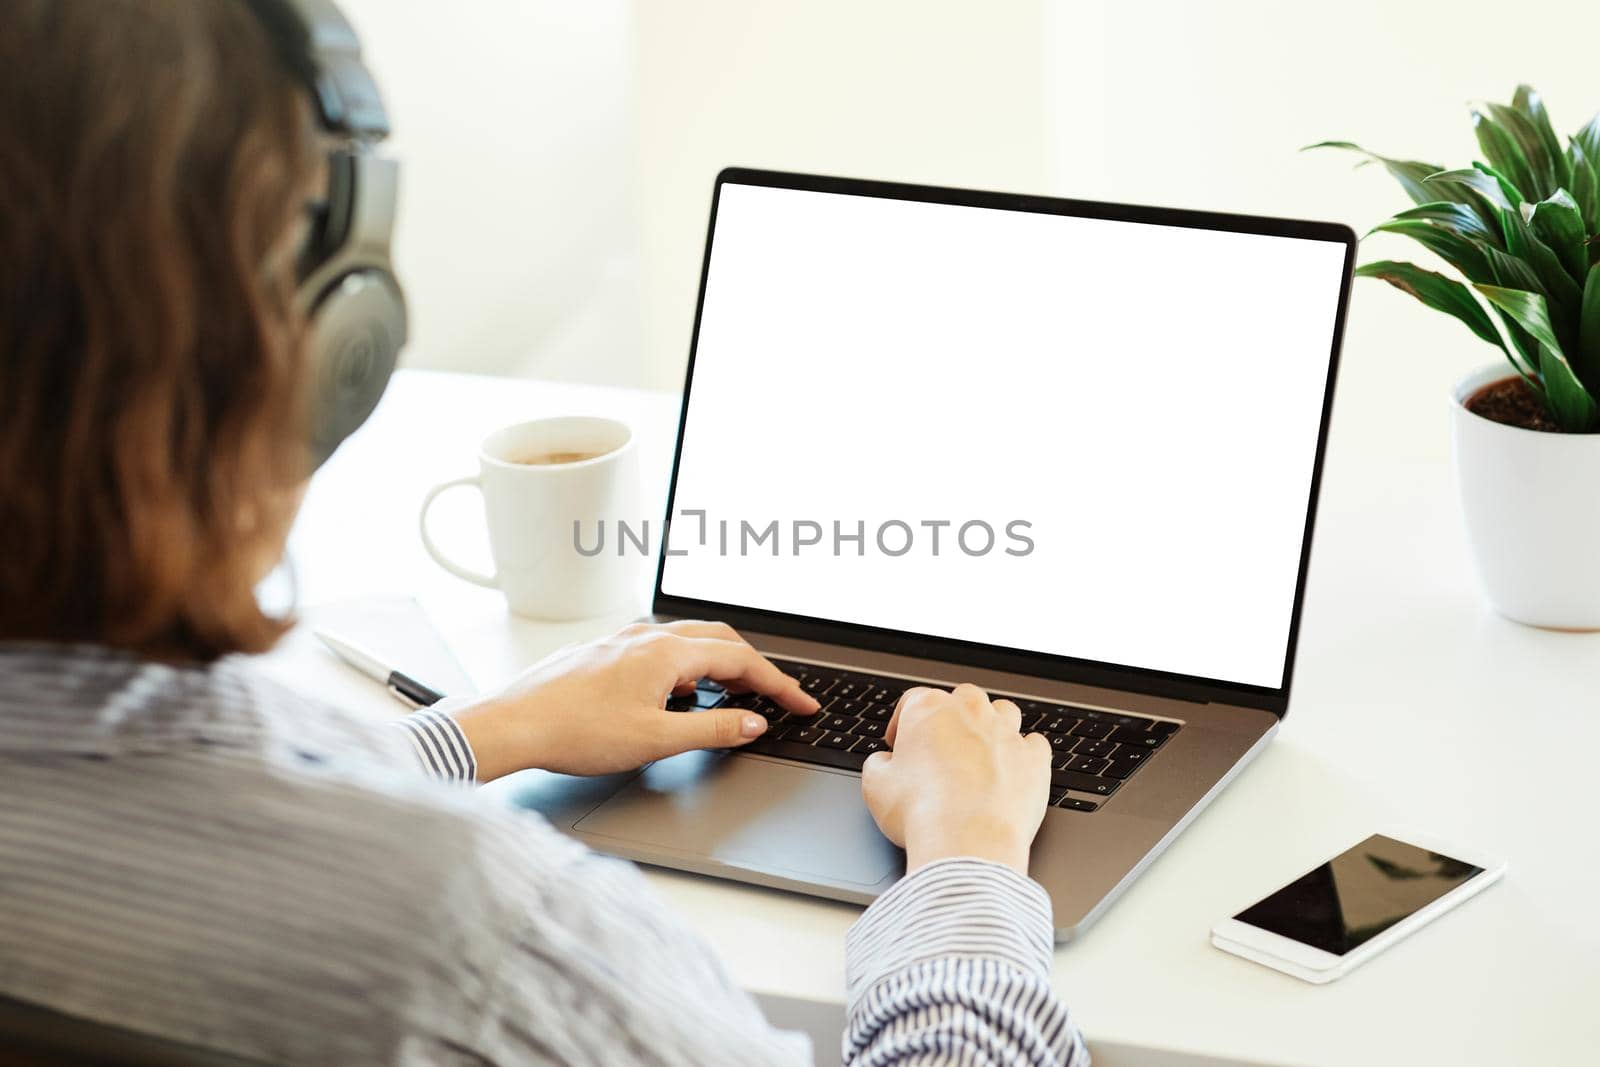 Close up of woman's hands typing on a laptop in an office or at home